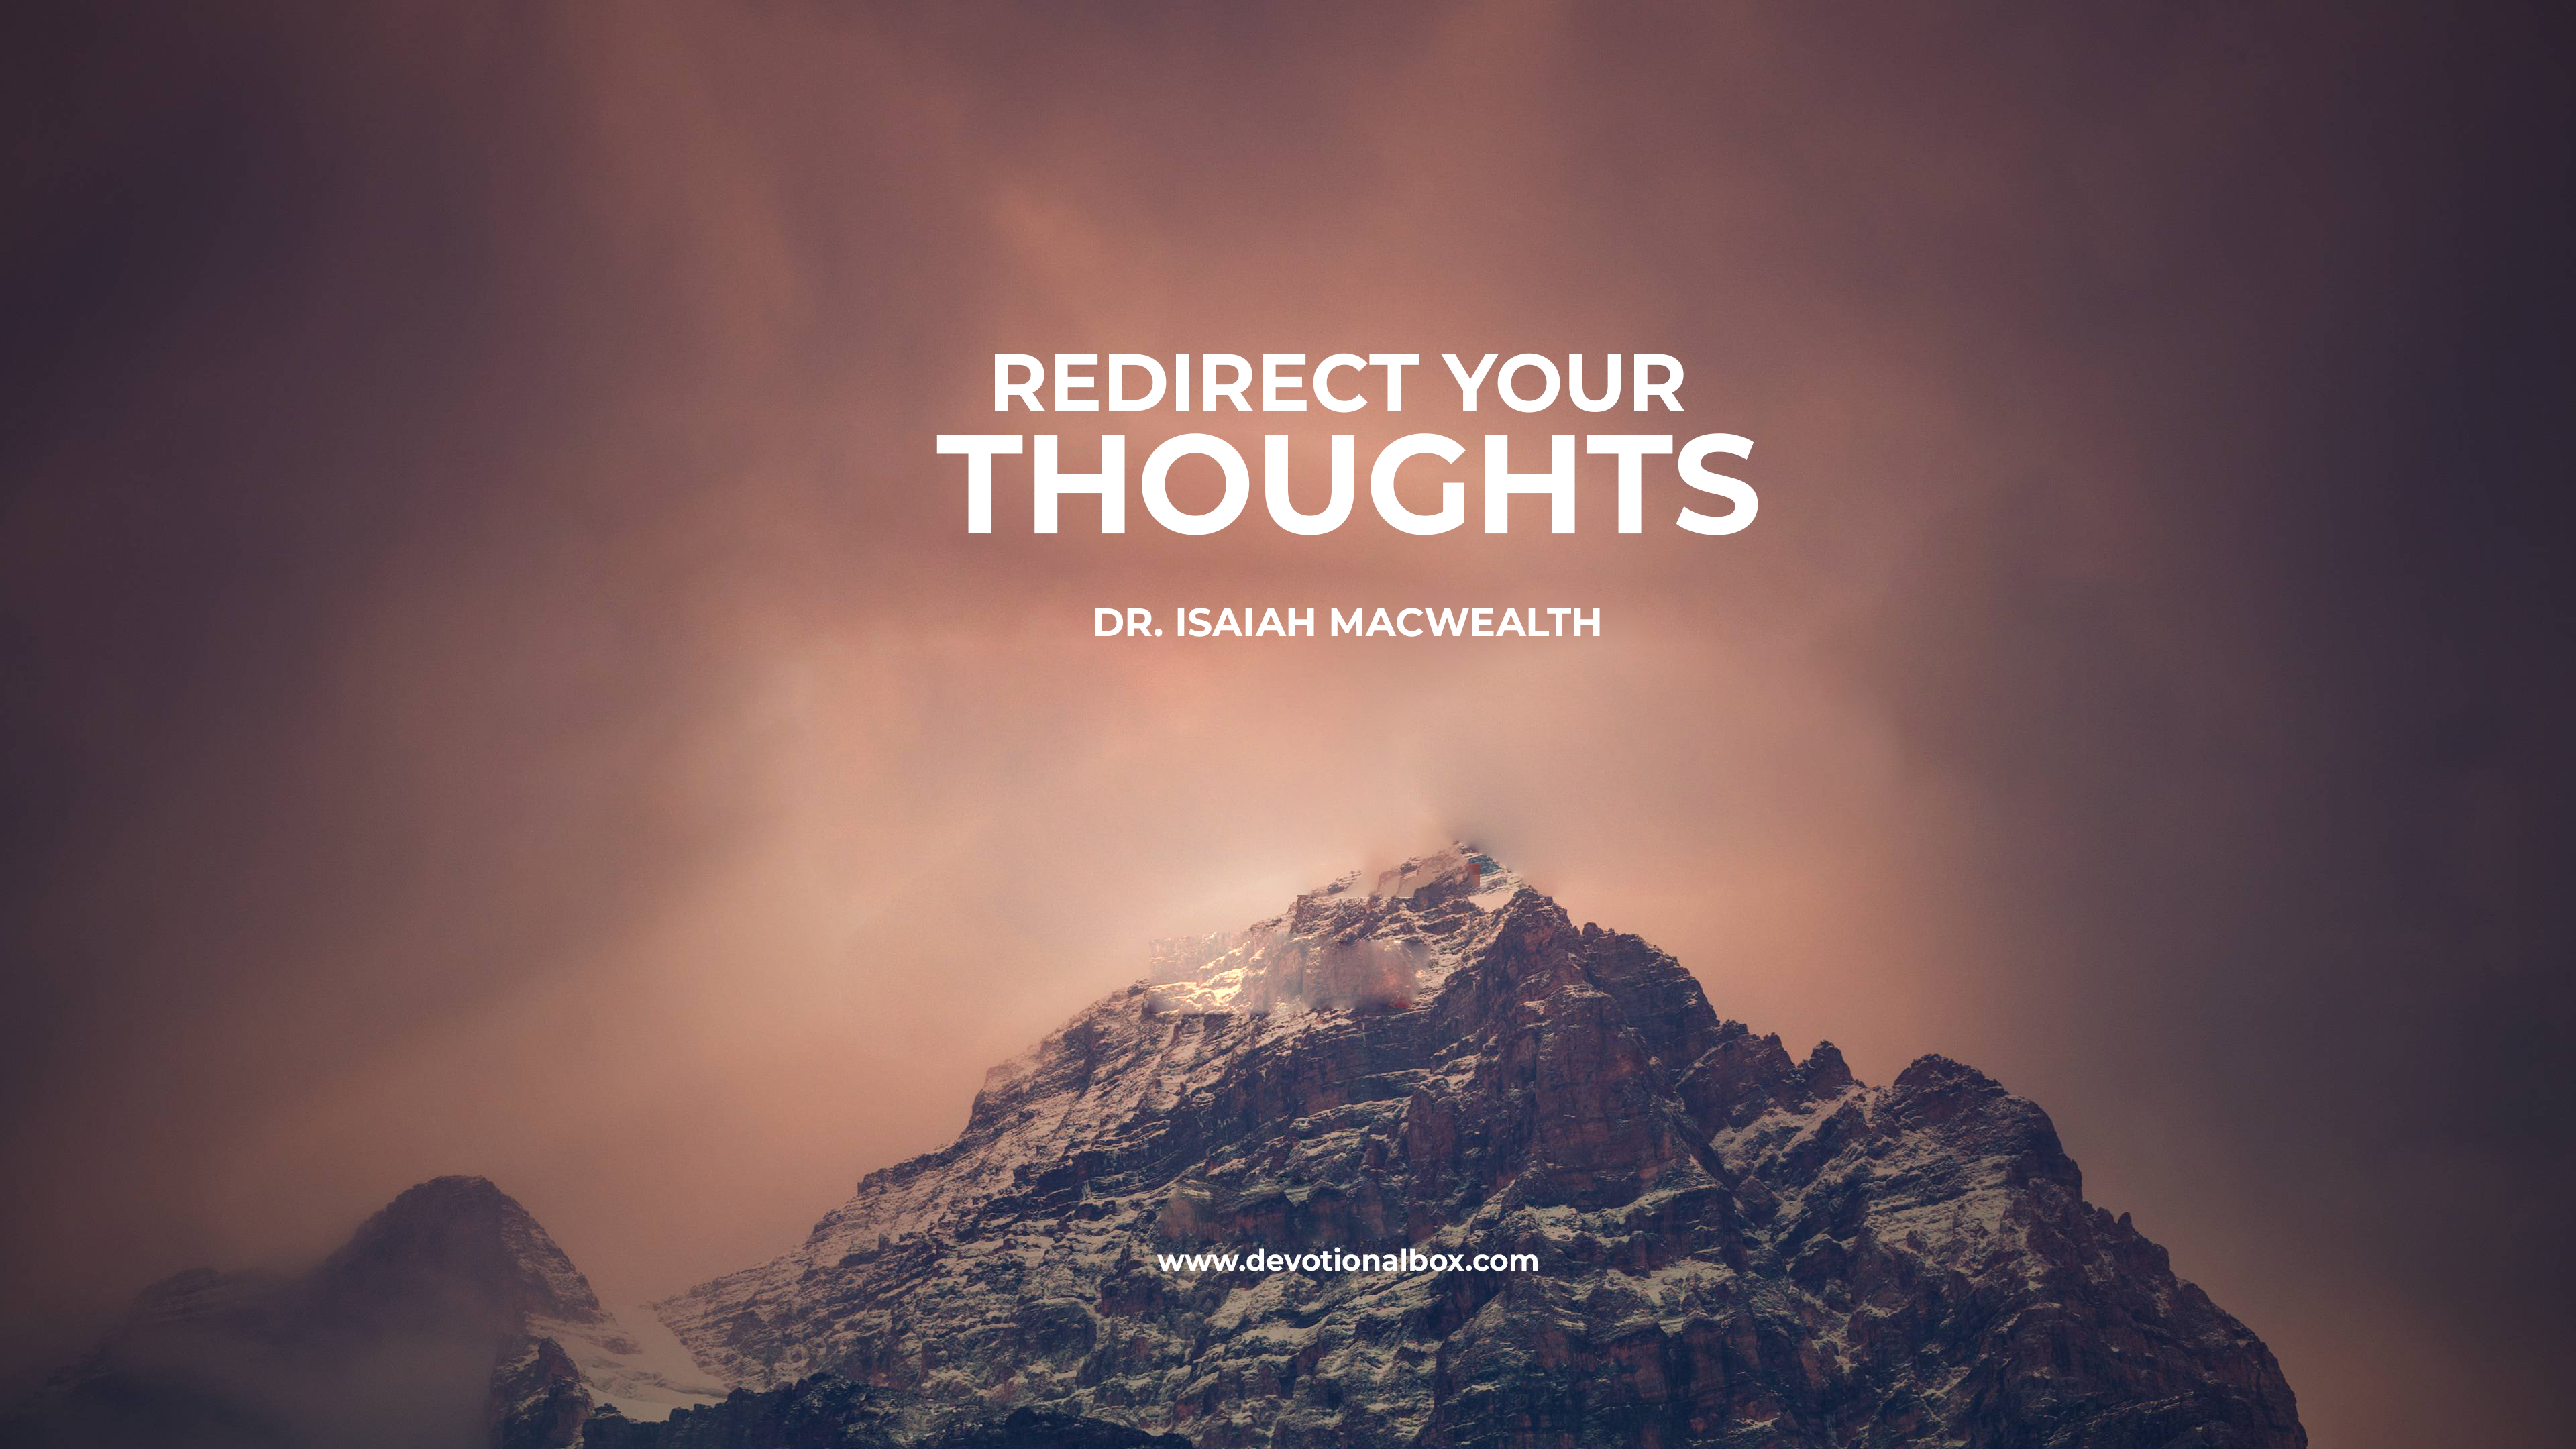 REDIRECT-YOUR-THOUGHTS---DR.-ISAIAH-MACWEALTH